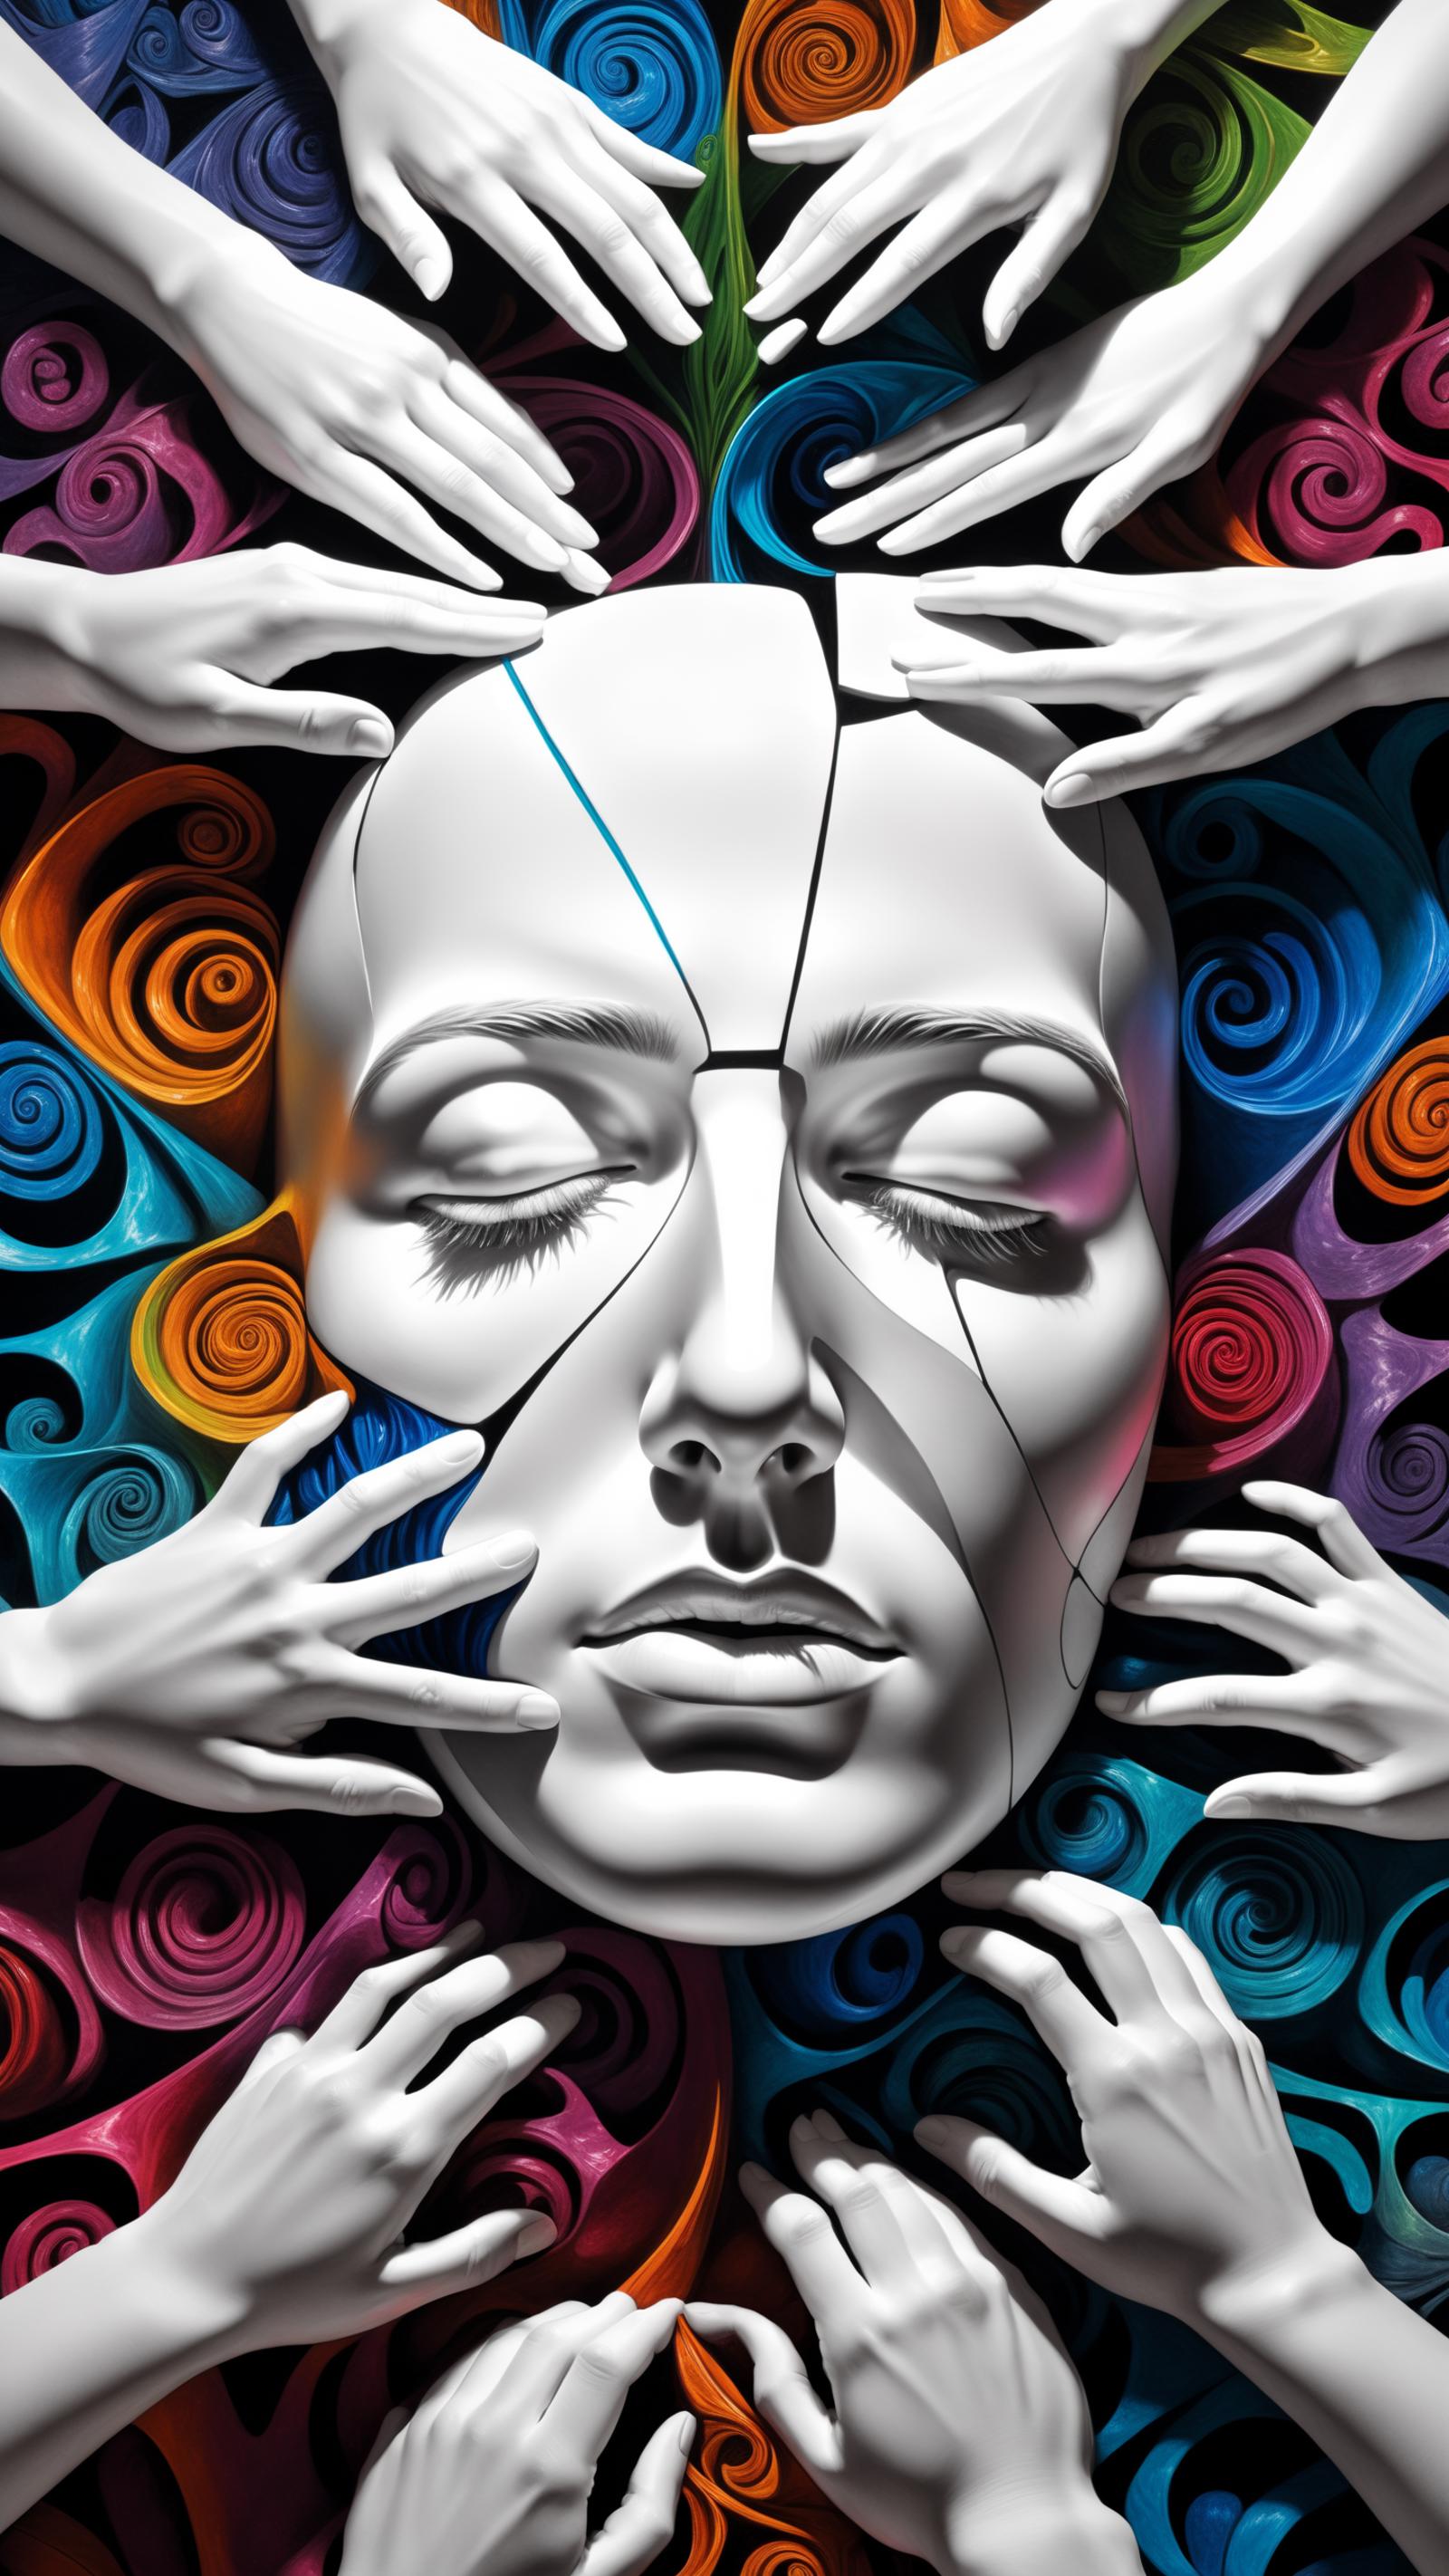 An artistic portrait of a woman's face with swirly designs, surrounded by hands reaching out to her.